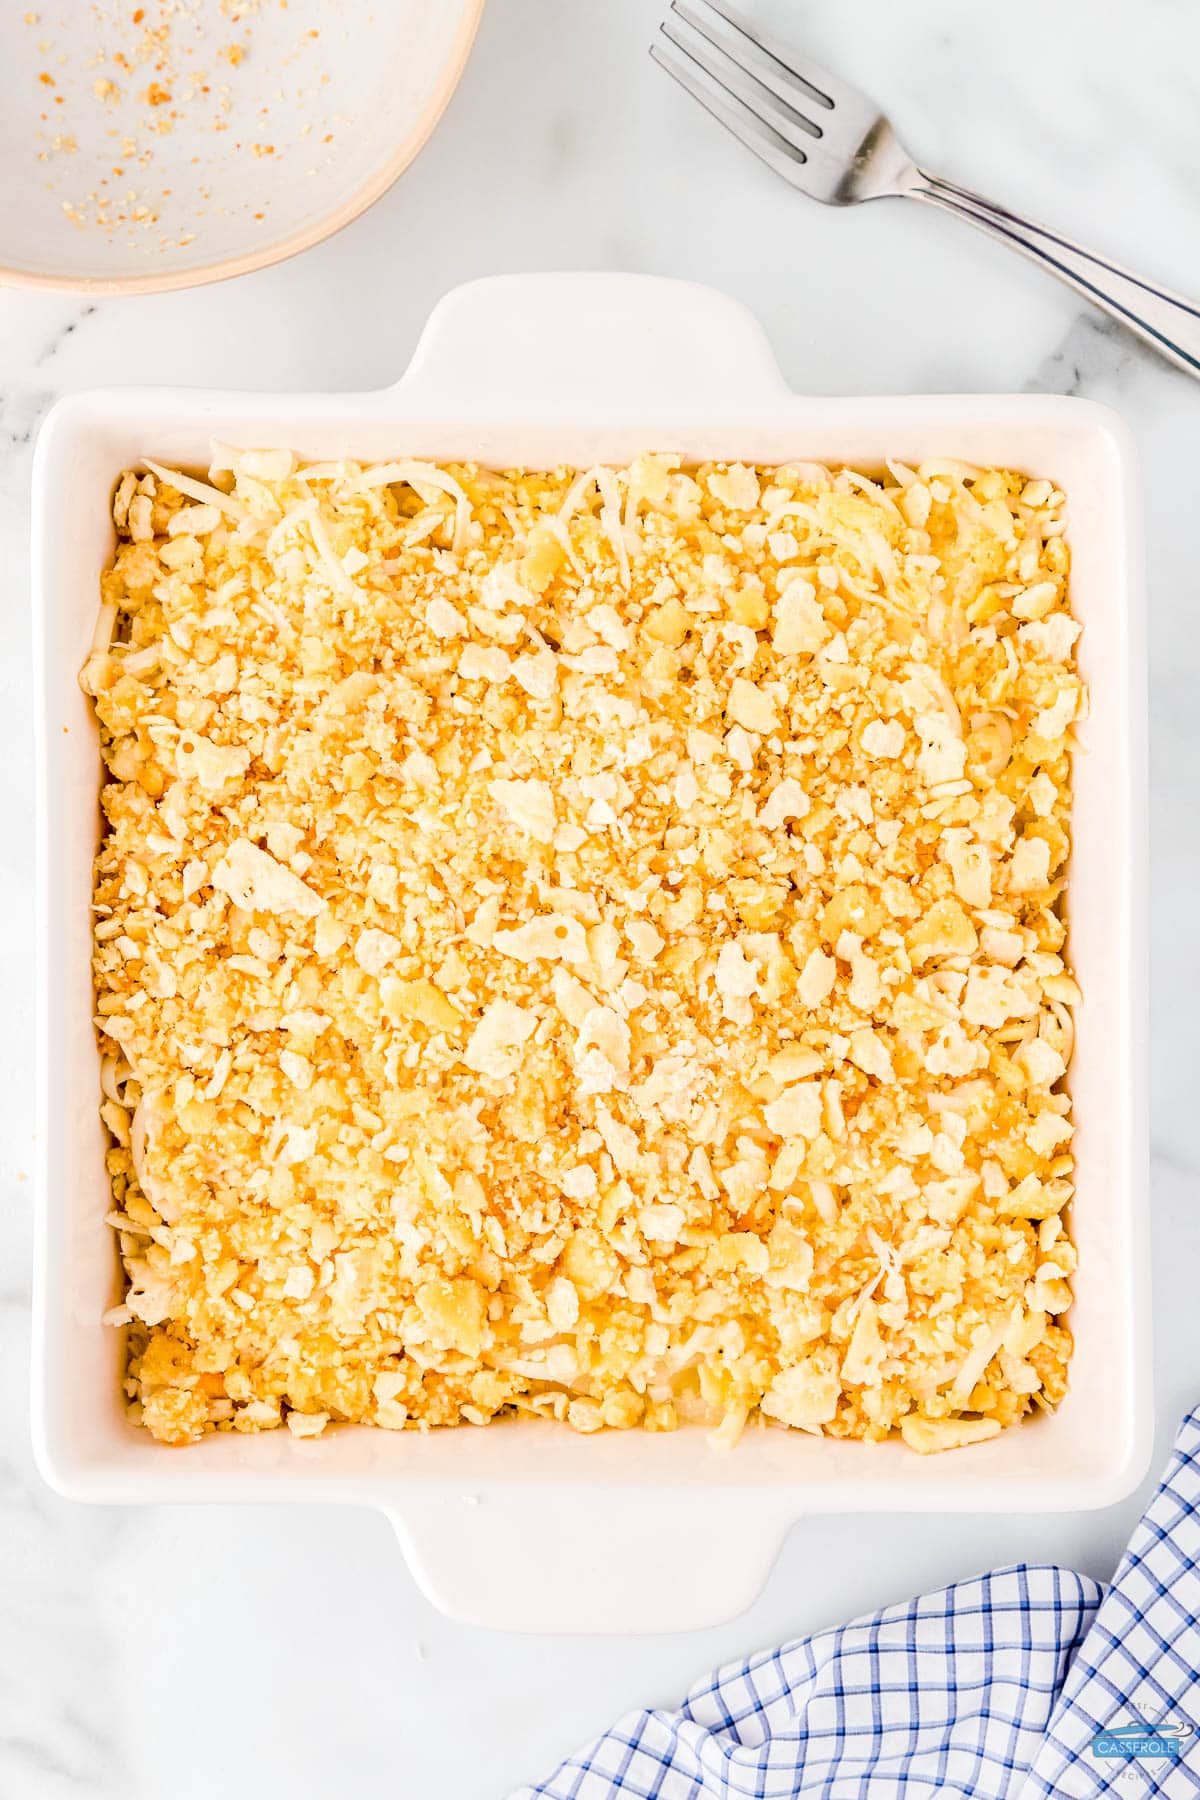 unbaked onion casserole in a square white dish